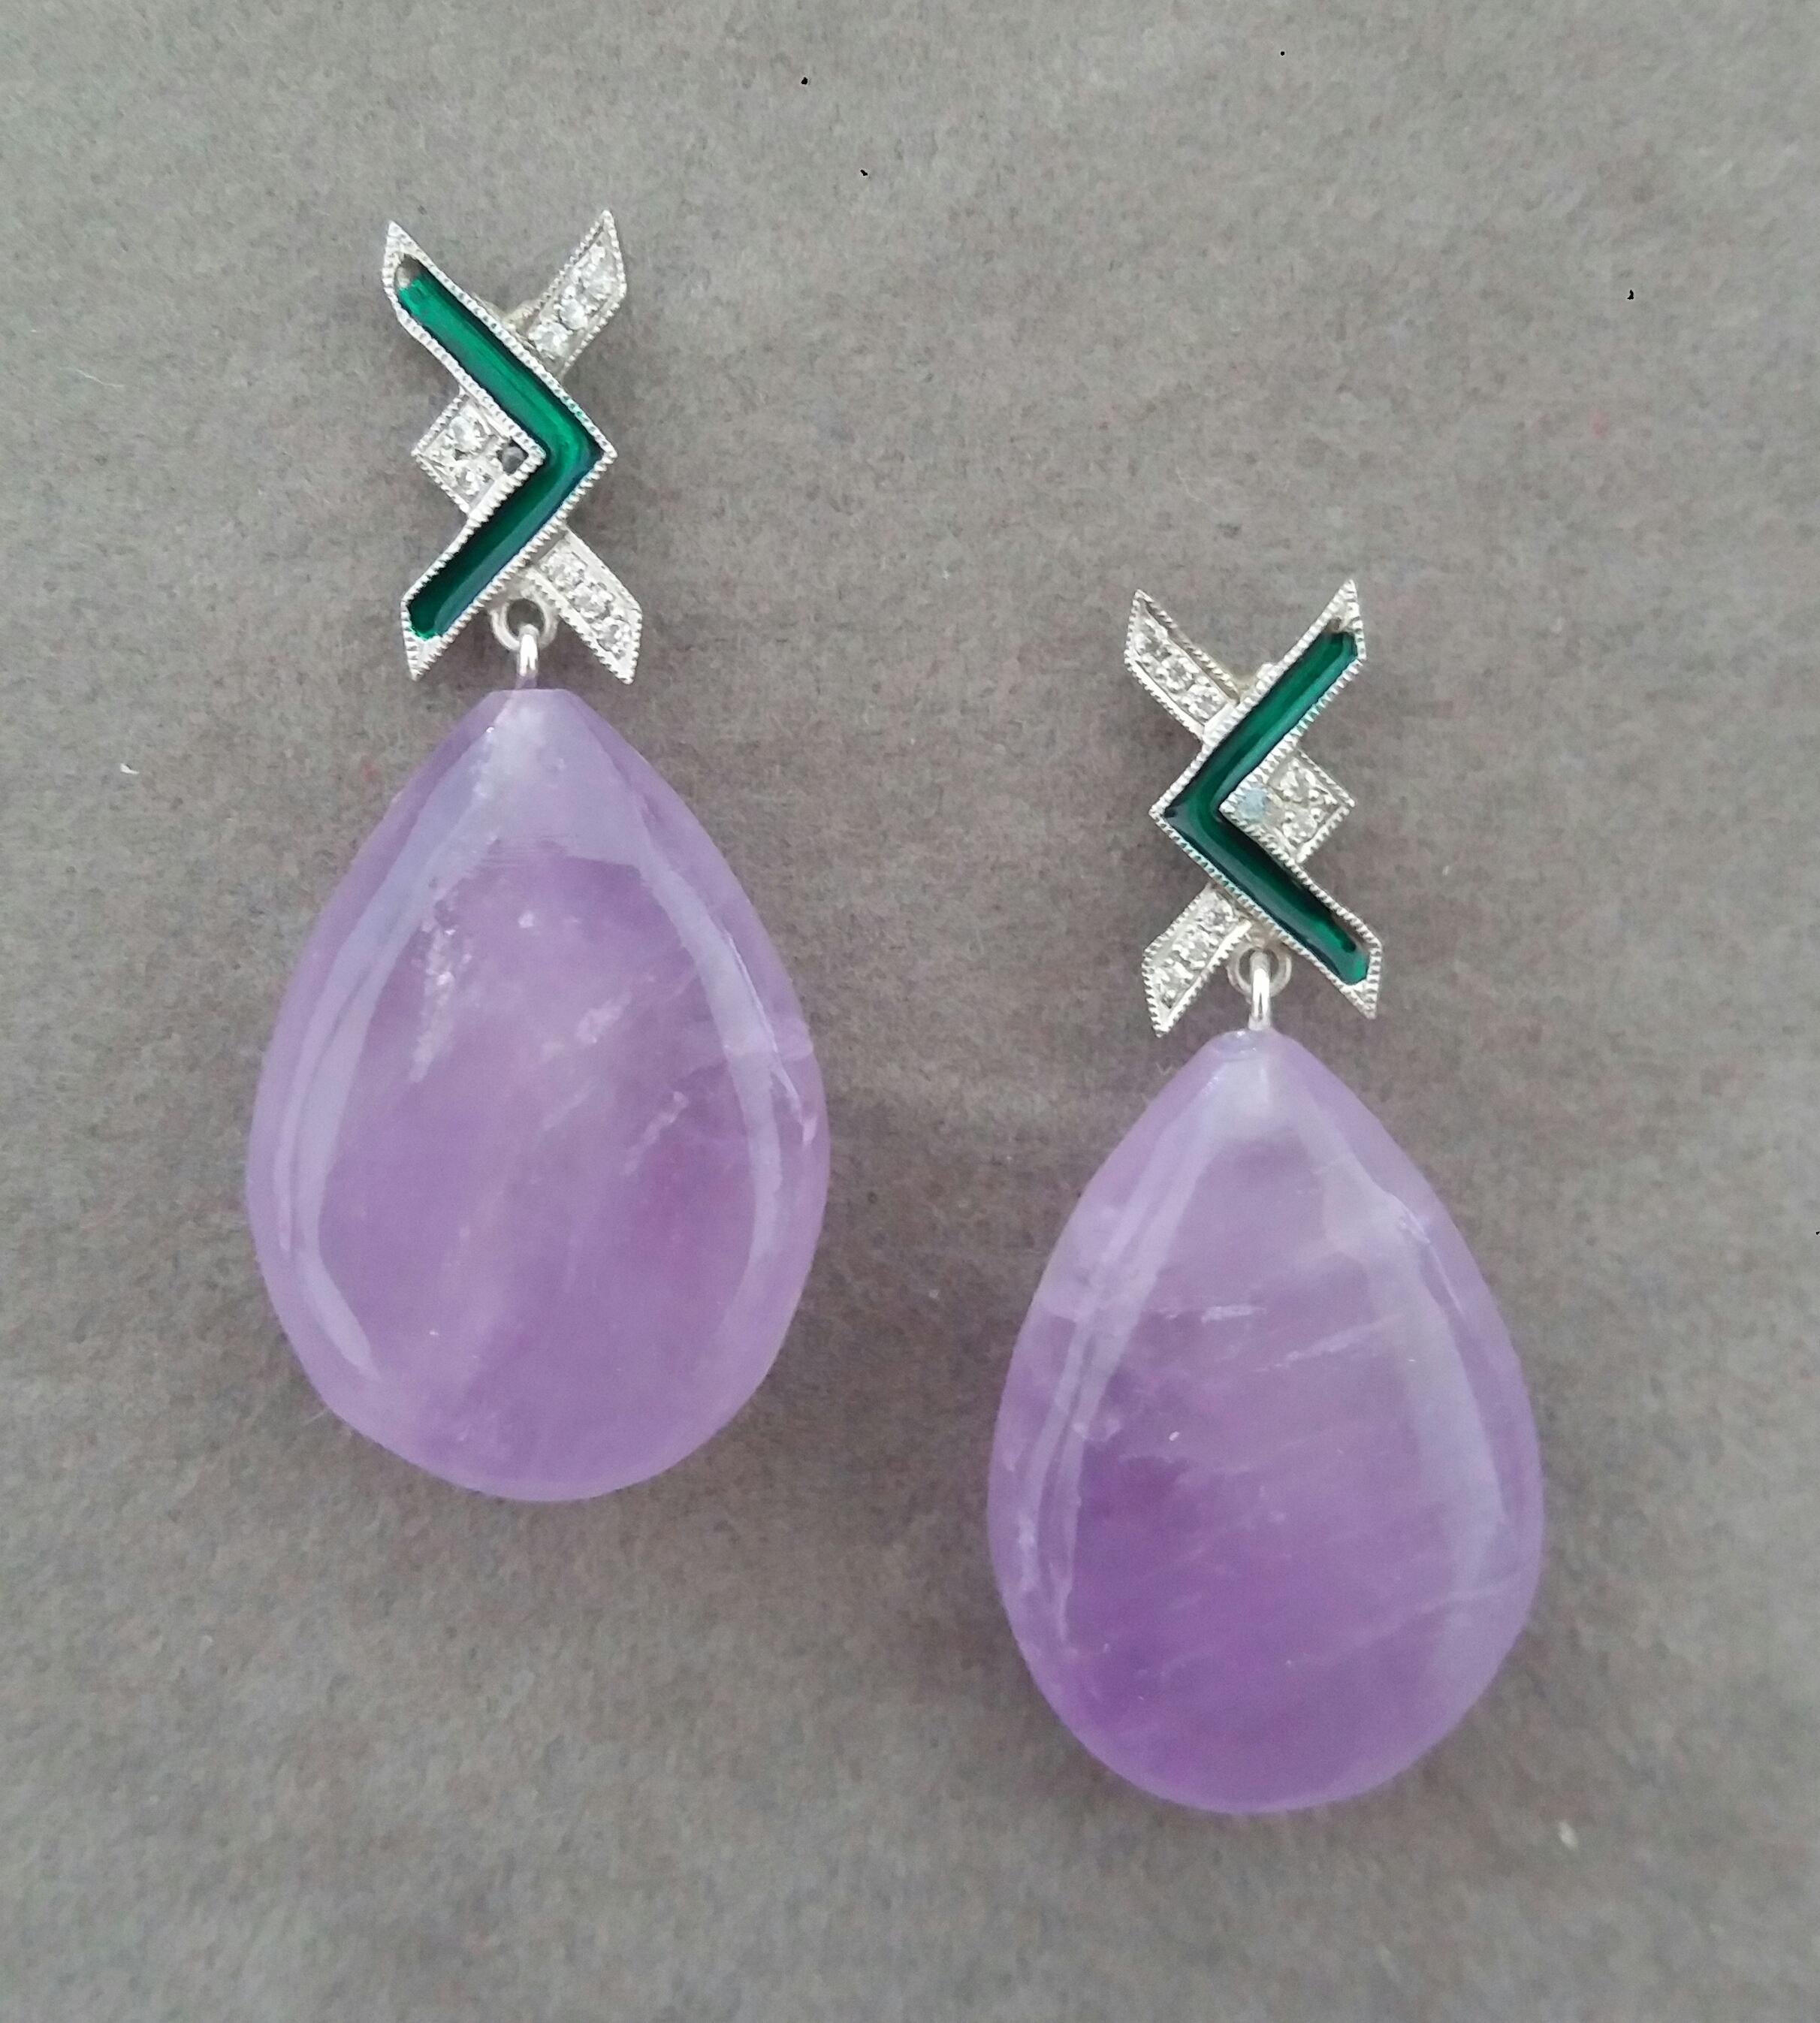 In these Art Deco Style handmade earrings 2 very good quality Natural Amethyst plain drops measuring 18 x  26 mm. are suspended from 2 white 14 kt gold tops  with 16 full cut round diamonds and Green Enamels.

In 1978 our workshop started in Italy